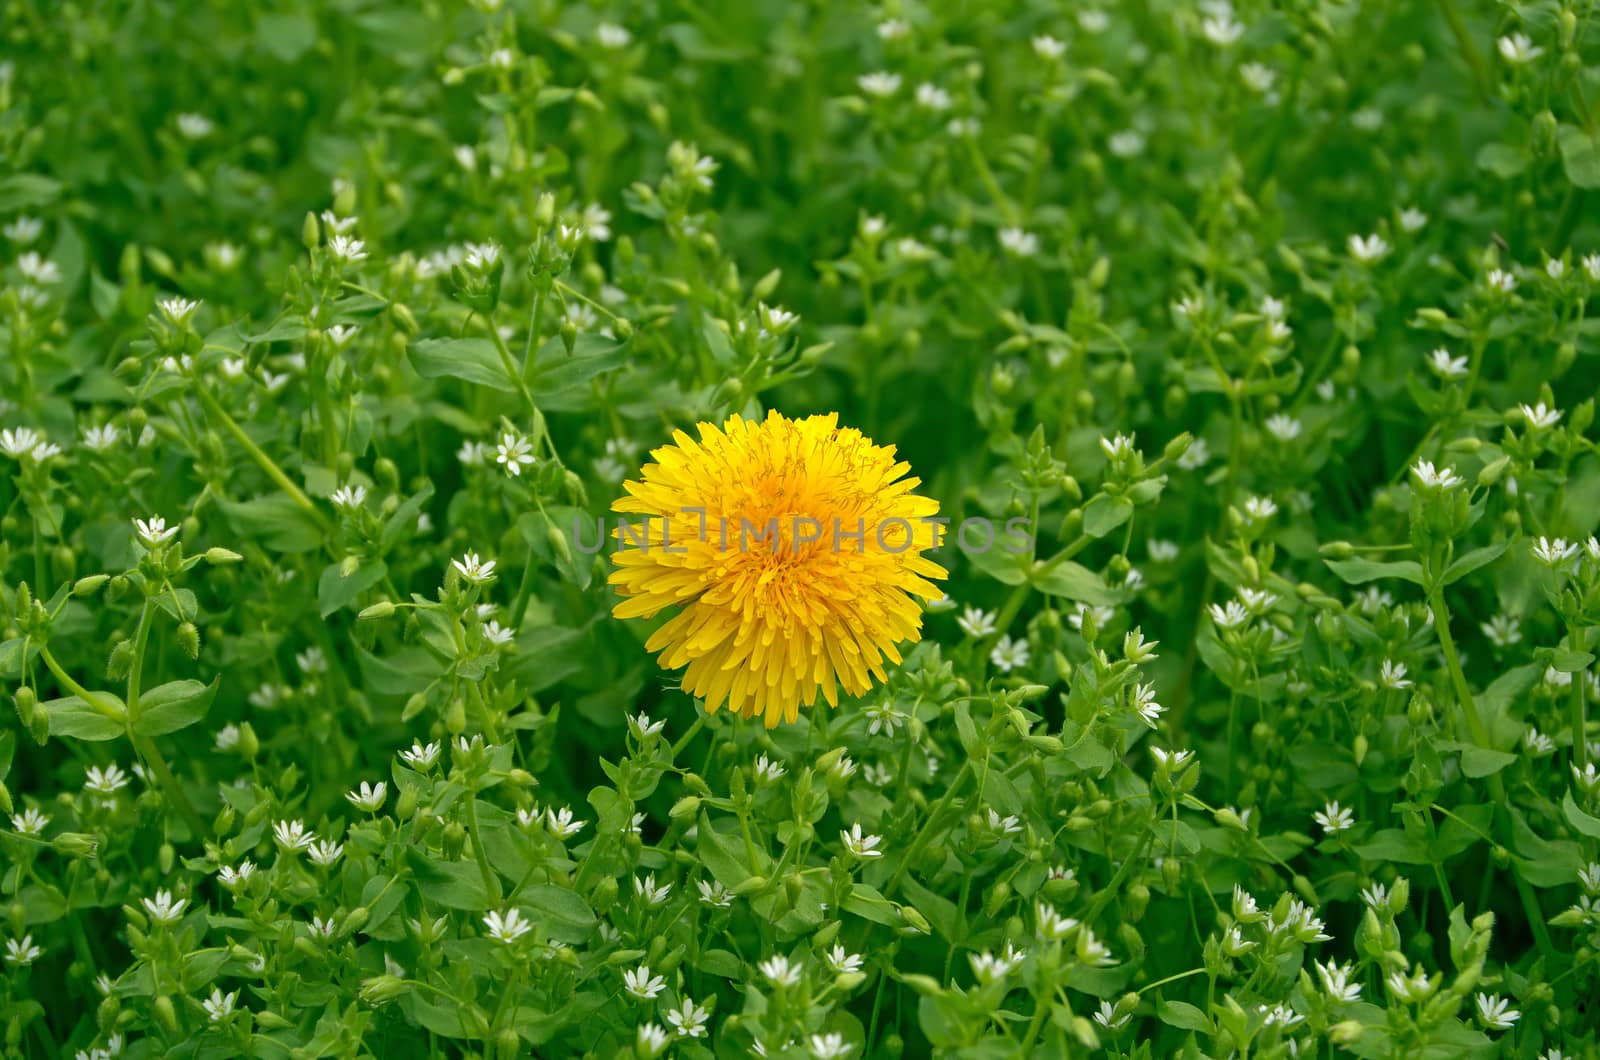 Yellow flower surrounded by small white flowers in early spring.